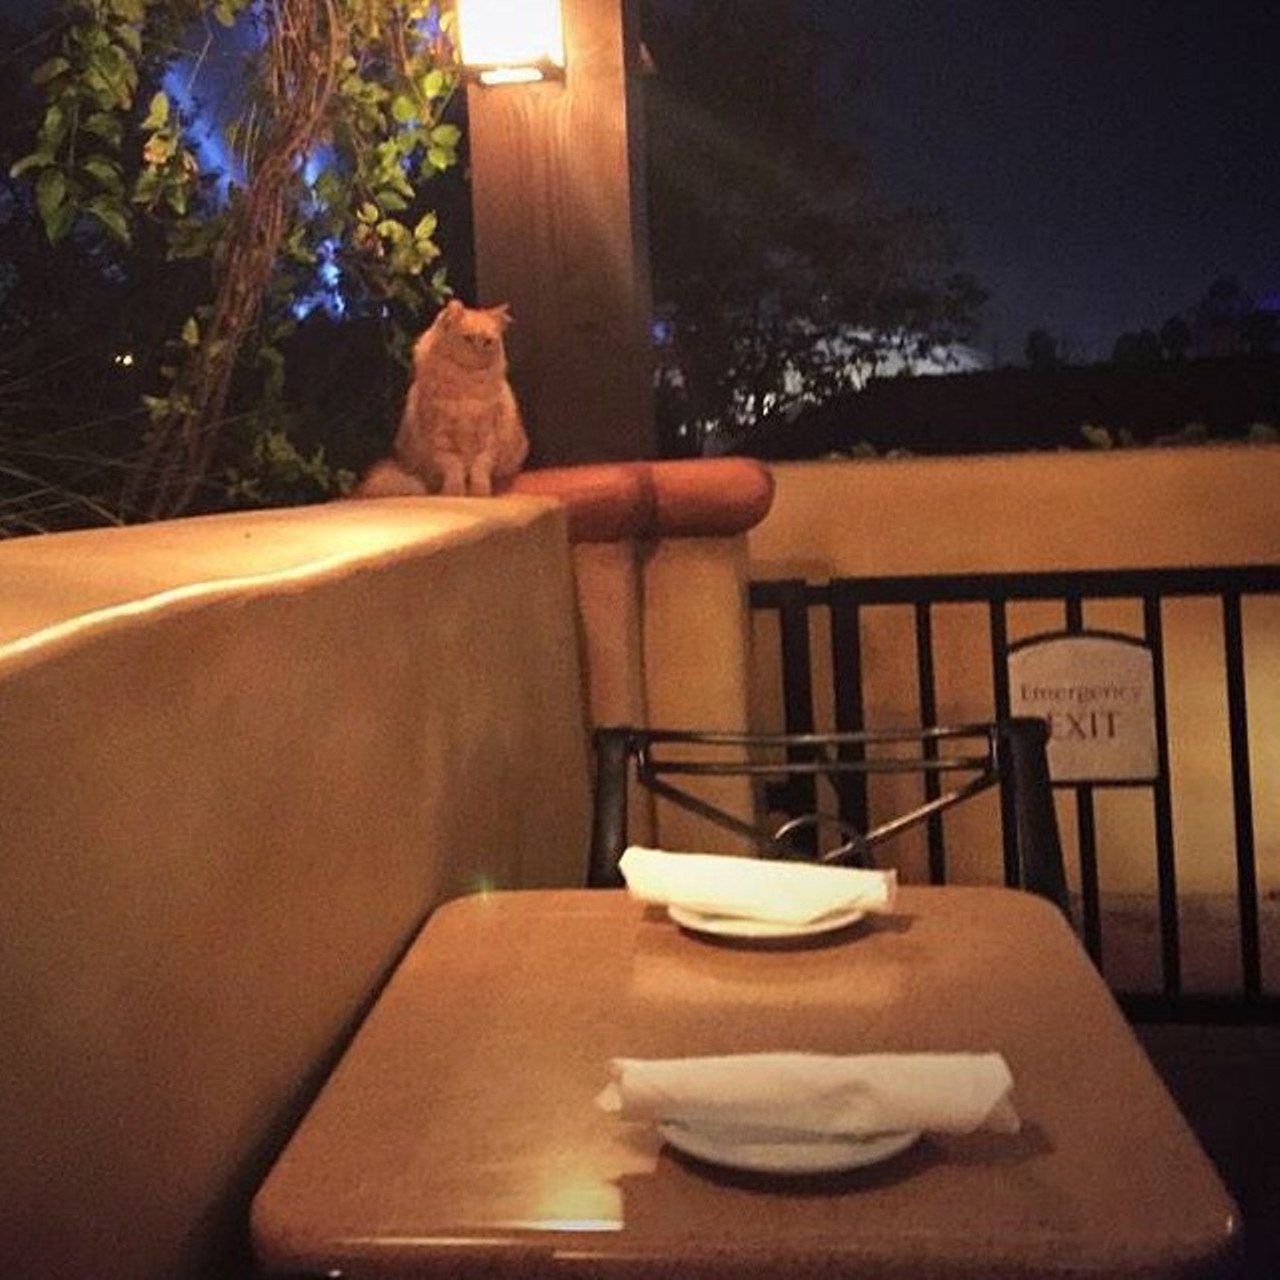 There's an Instagram account that chronicles the feral cats of Disney parks